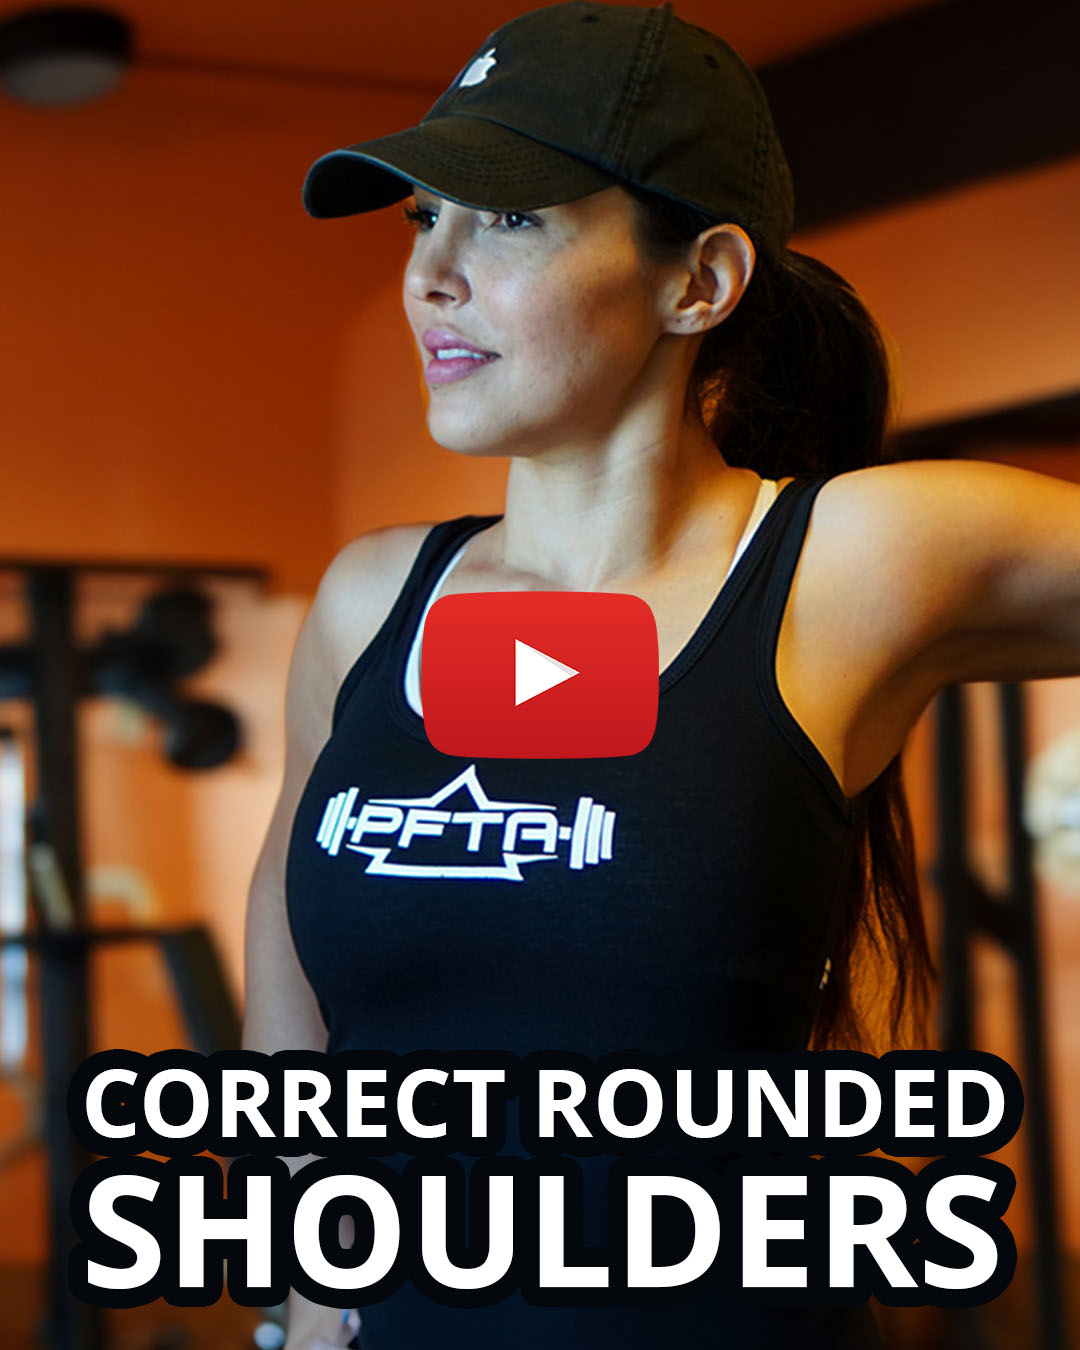 correct rounded shoulders at pfta schools